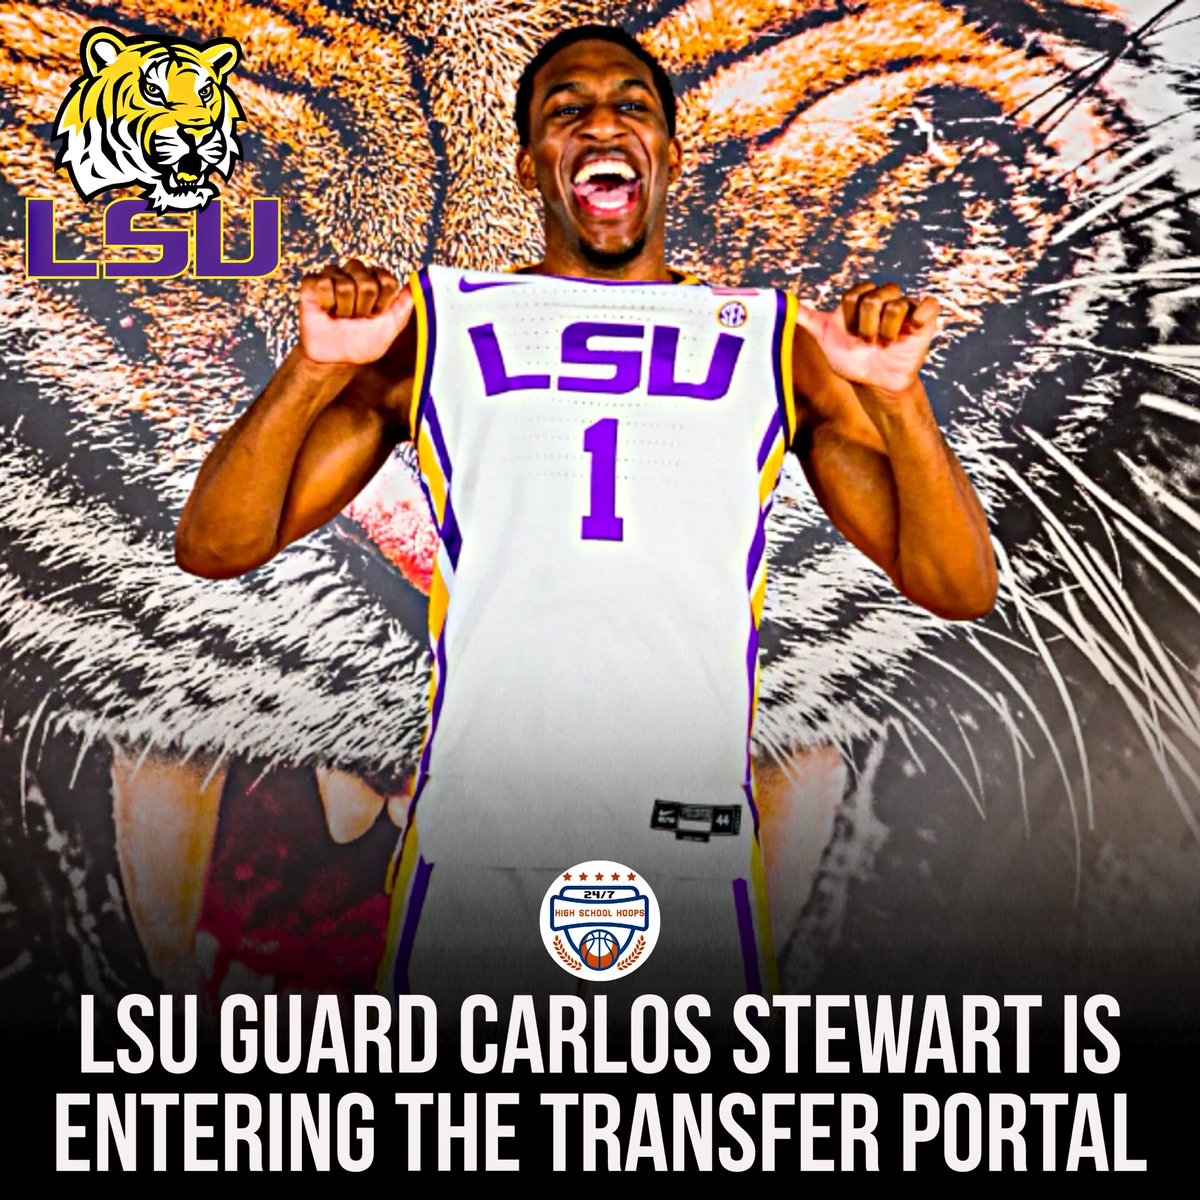 NEWS: LSU guard Carlos Stewart is entering the transfer portal, per source. Stewart began his playing two seasons career at Santa Clara before transferring to LSU last spring. He missed the majority of this season due to a knee injury. He averaged 15.2PPG, 2.4RPG, 2.3APG and…